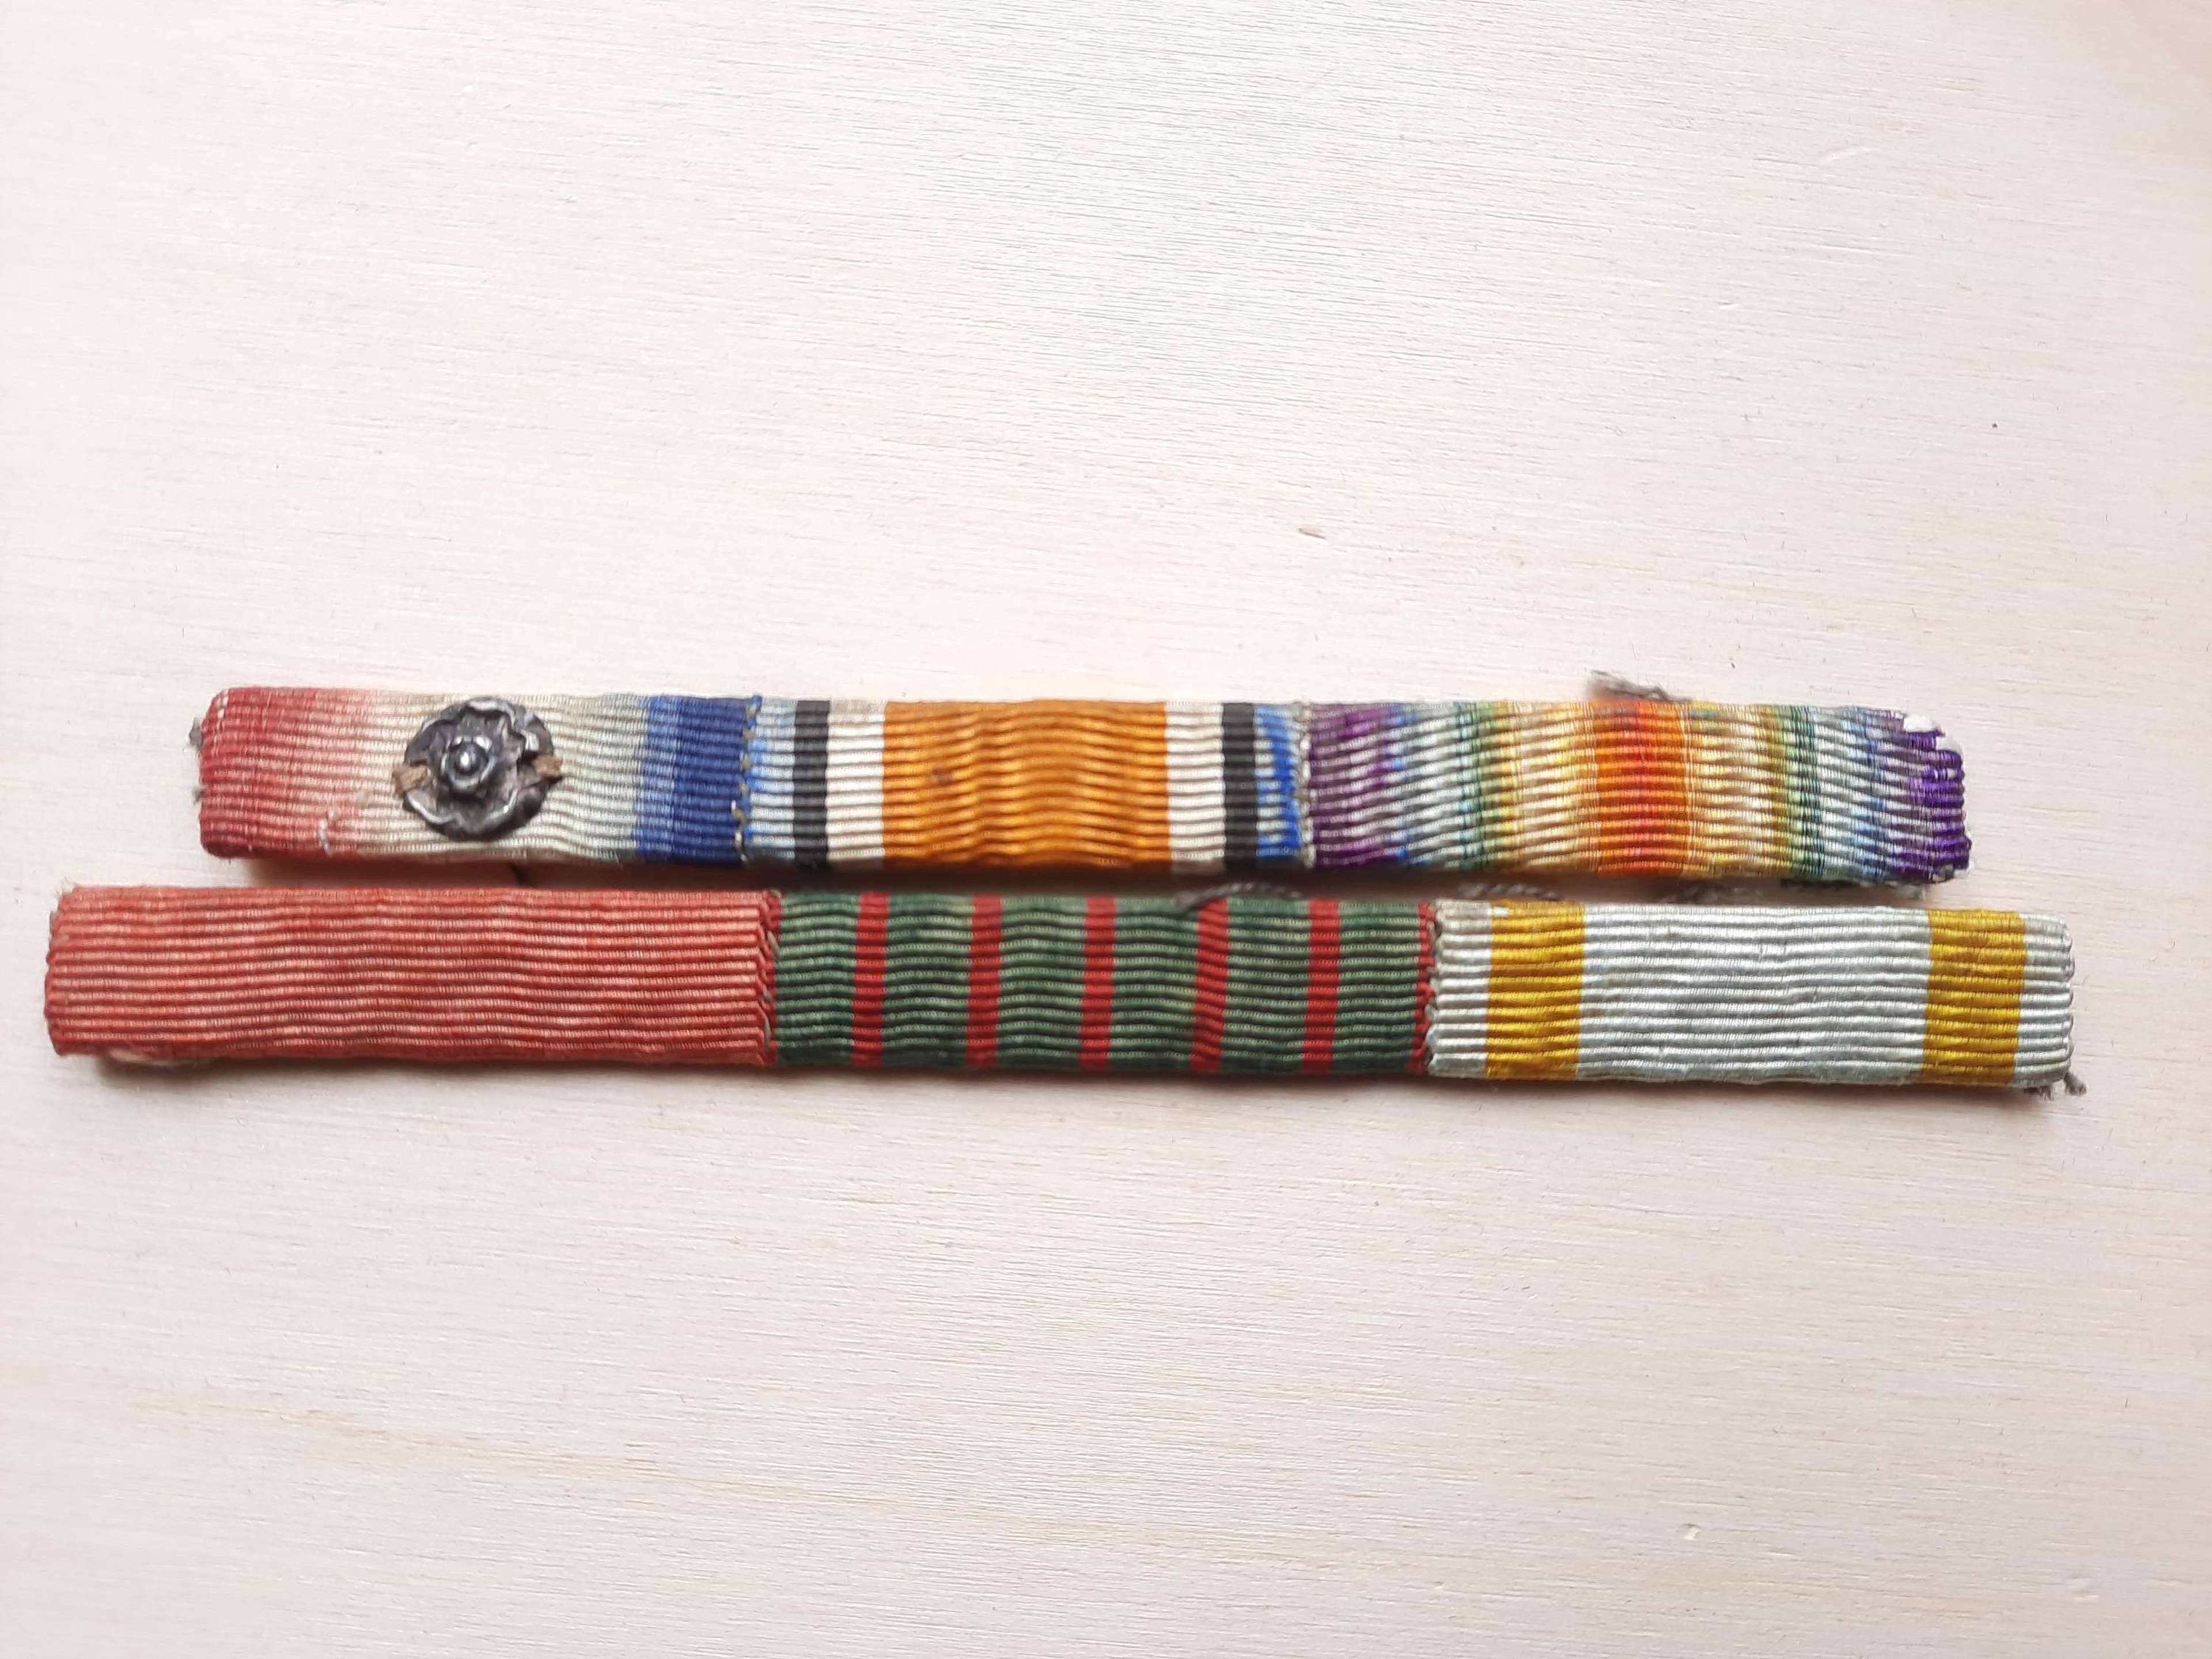 First World War Medal Ribbons